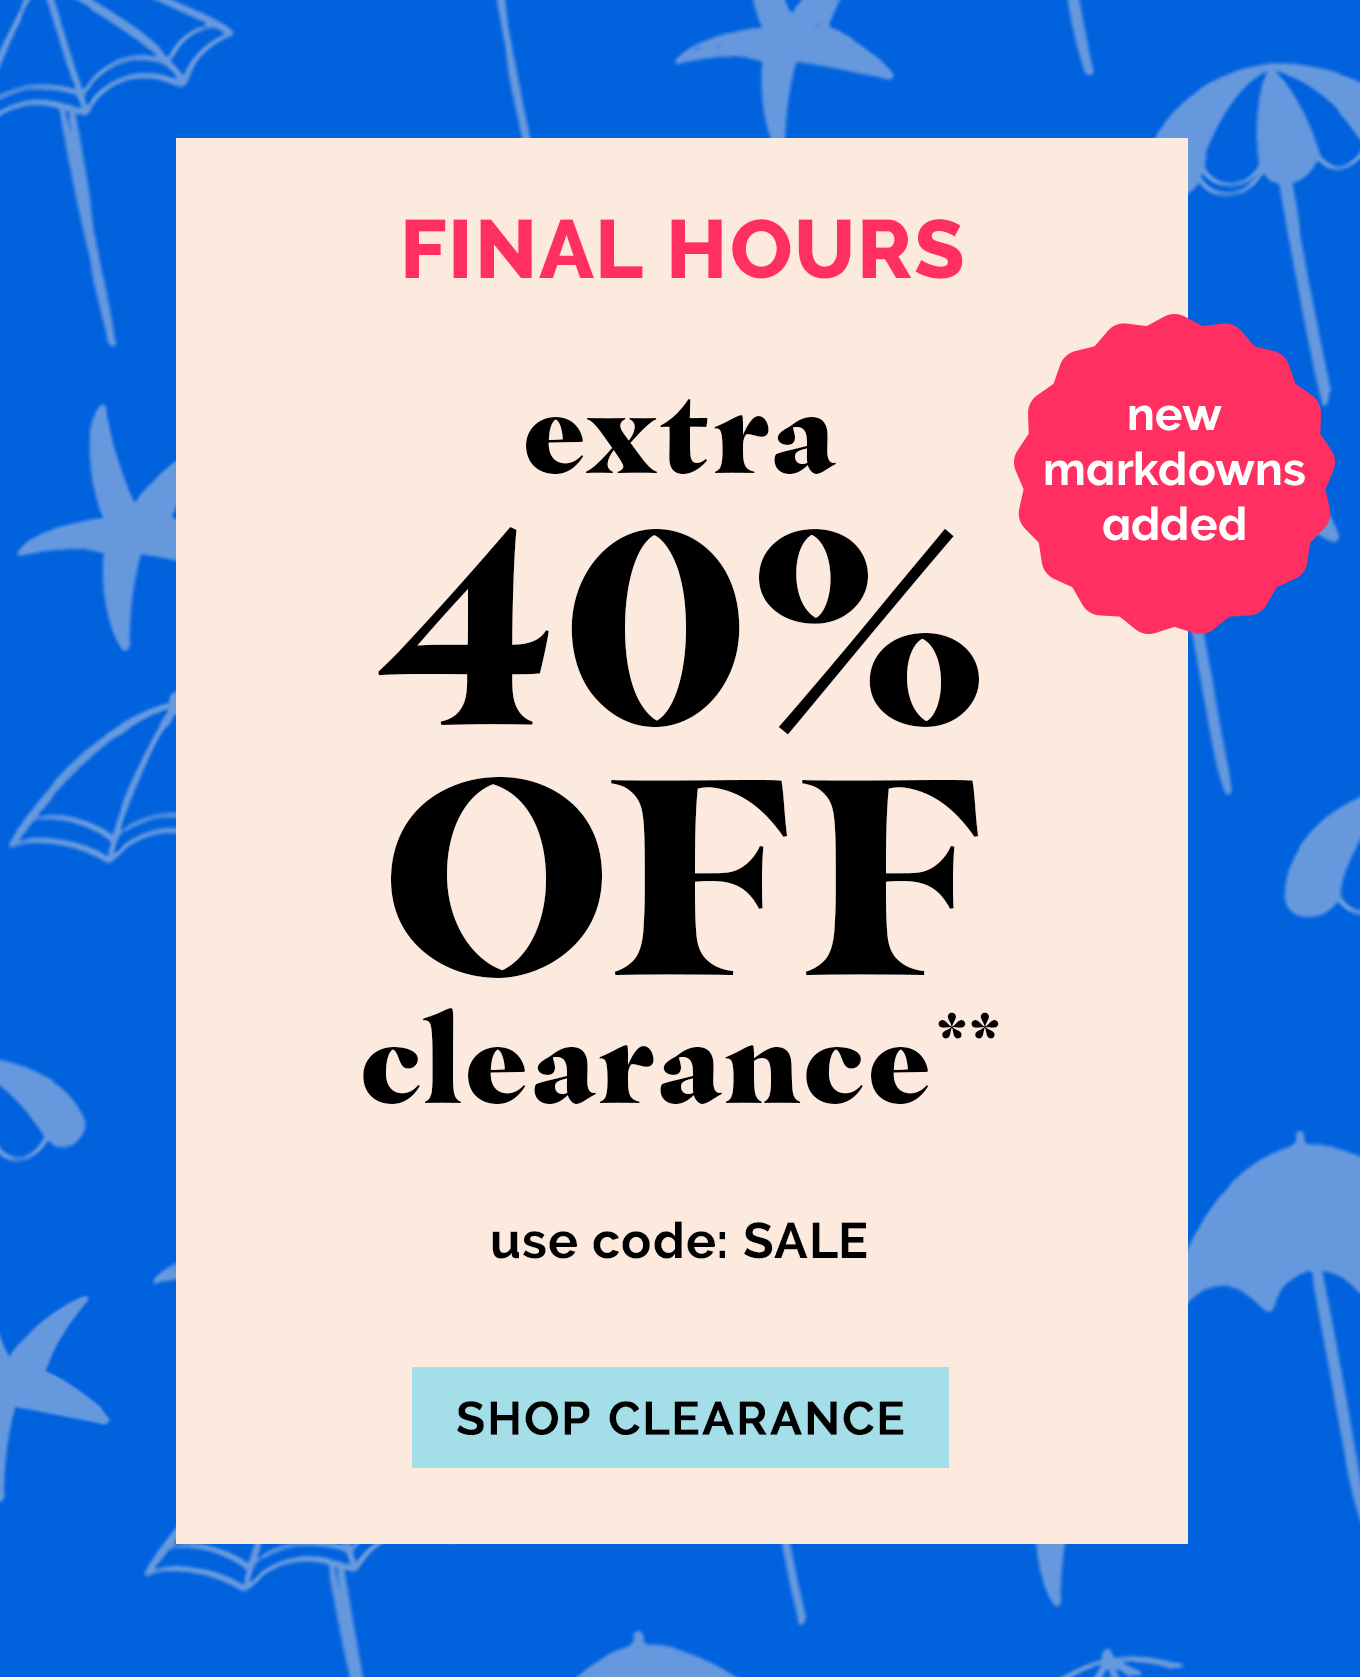 Final Hours! EXTRA 40% OFF CLEARANCE!** | use code: SALE